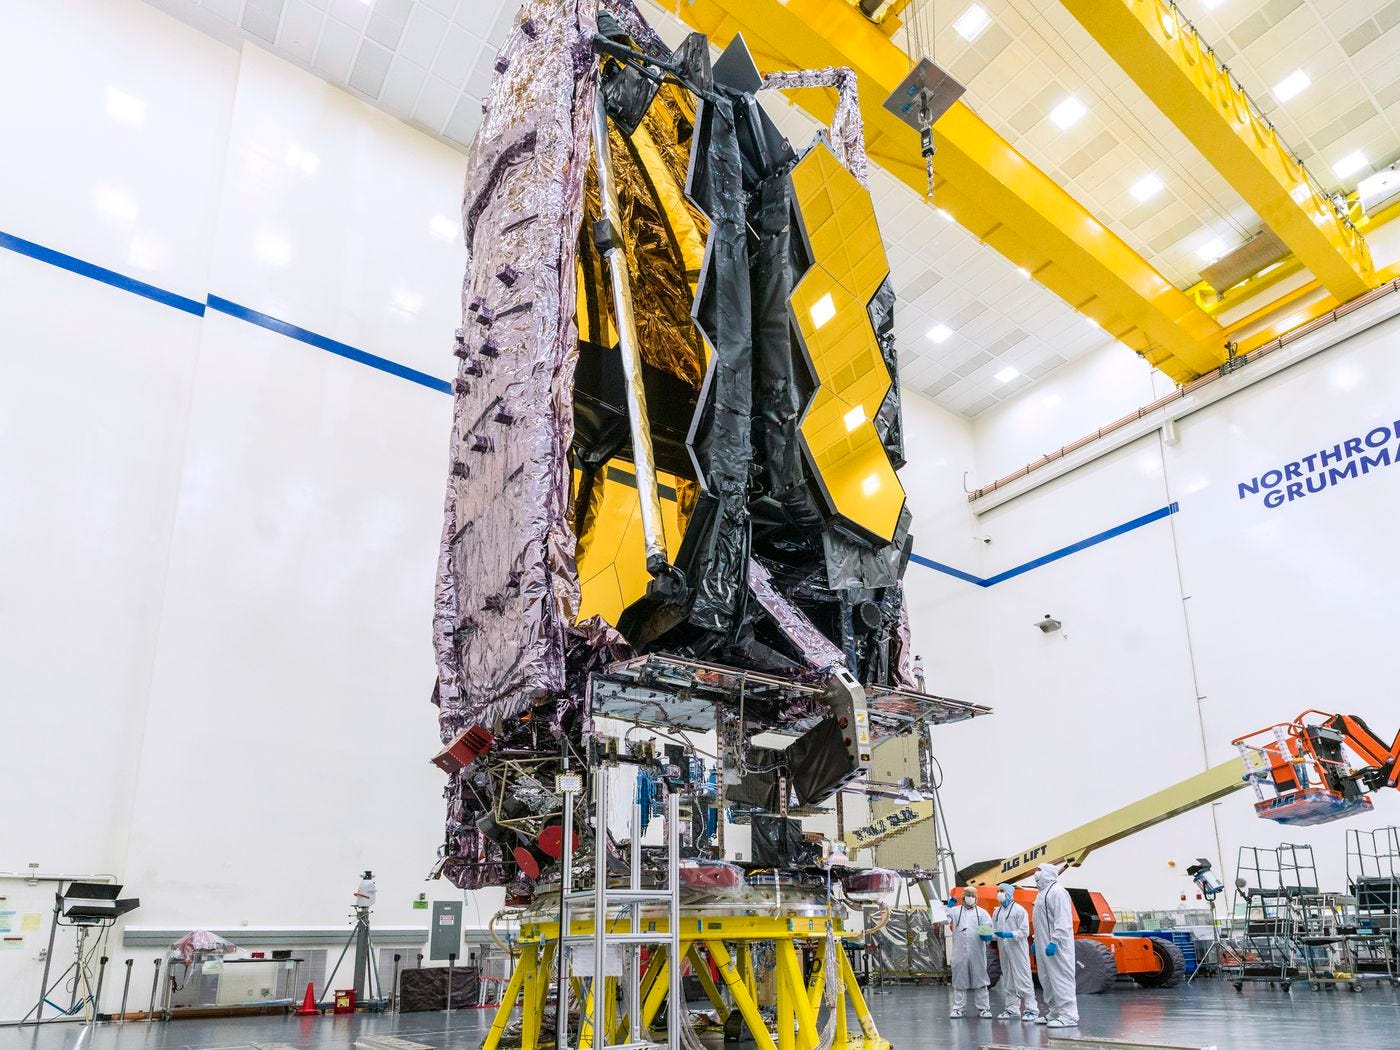 NASA sets new date for James Webb Space Telescope launch - The Verge